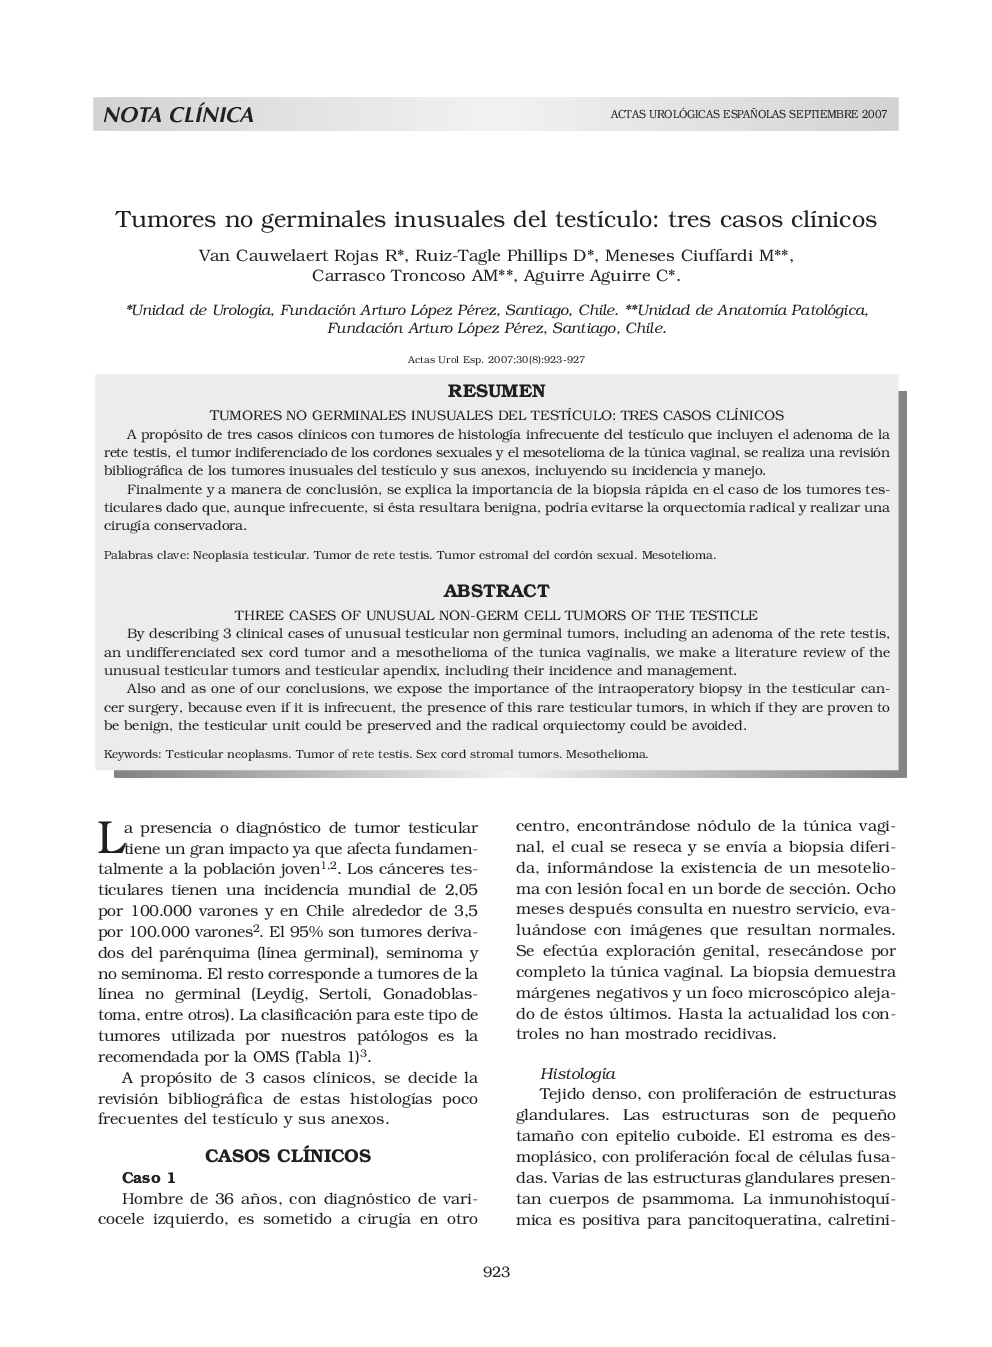 Tumores no germinales inusuales del testÃ­culo: tres casos clÃ­nicosThree cases of unusual non-germ cell tumors of the testicle